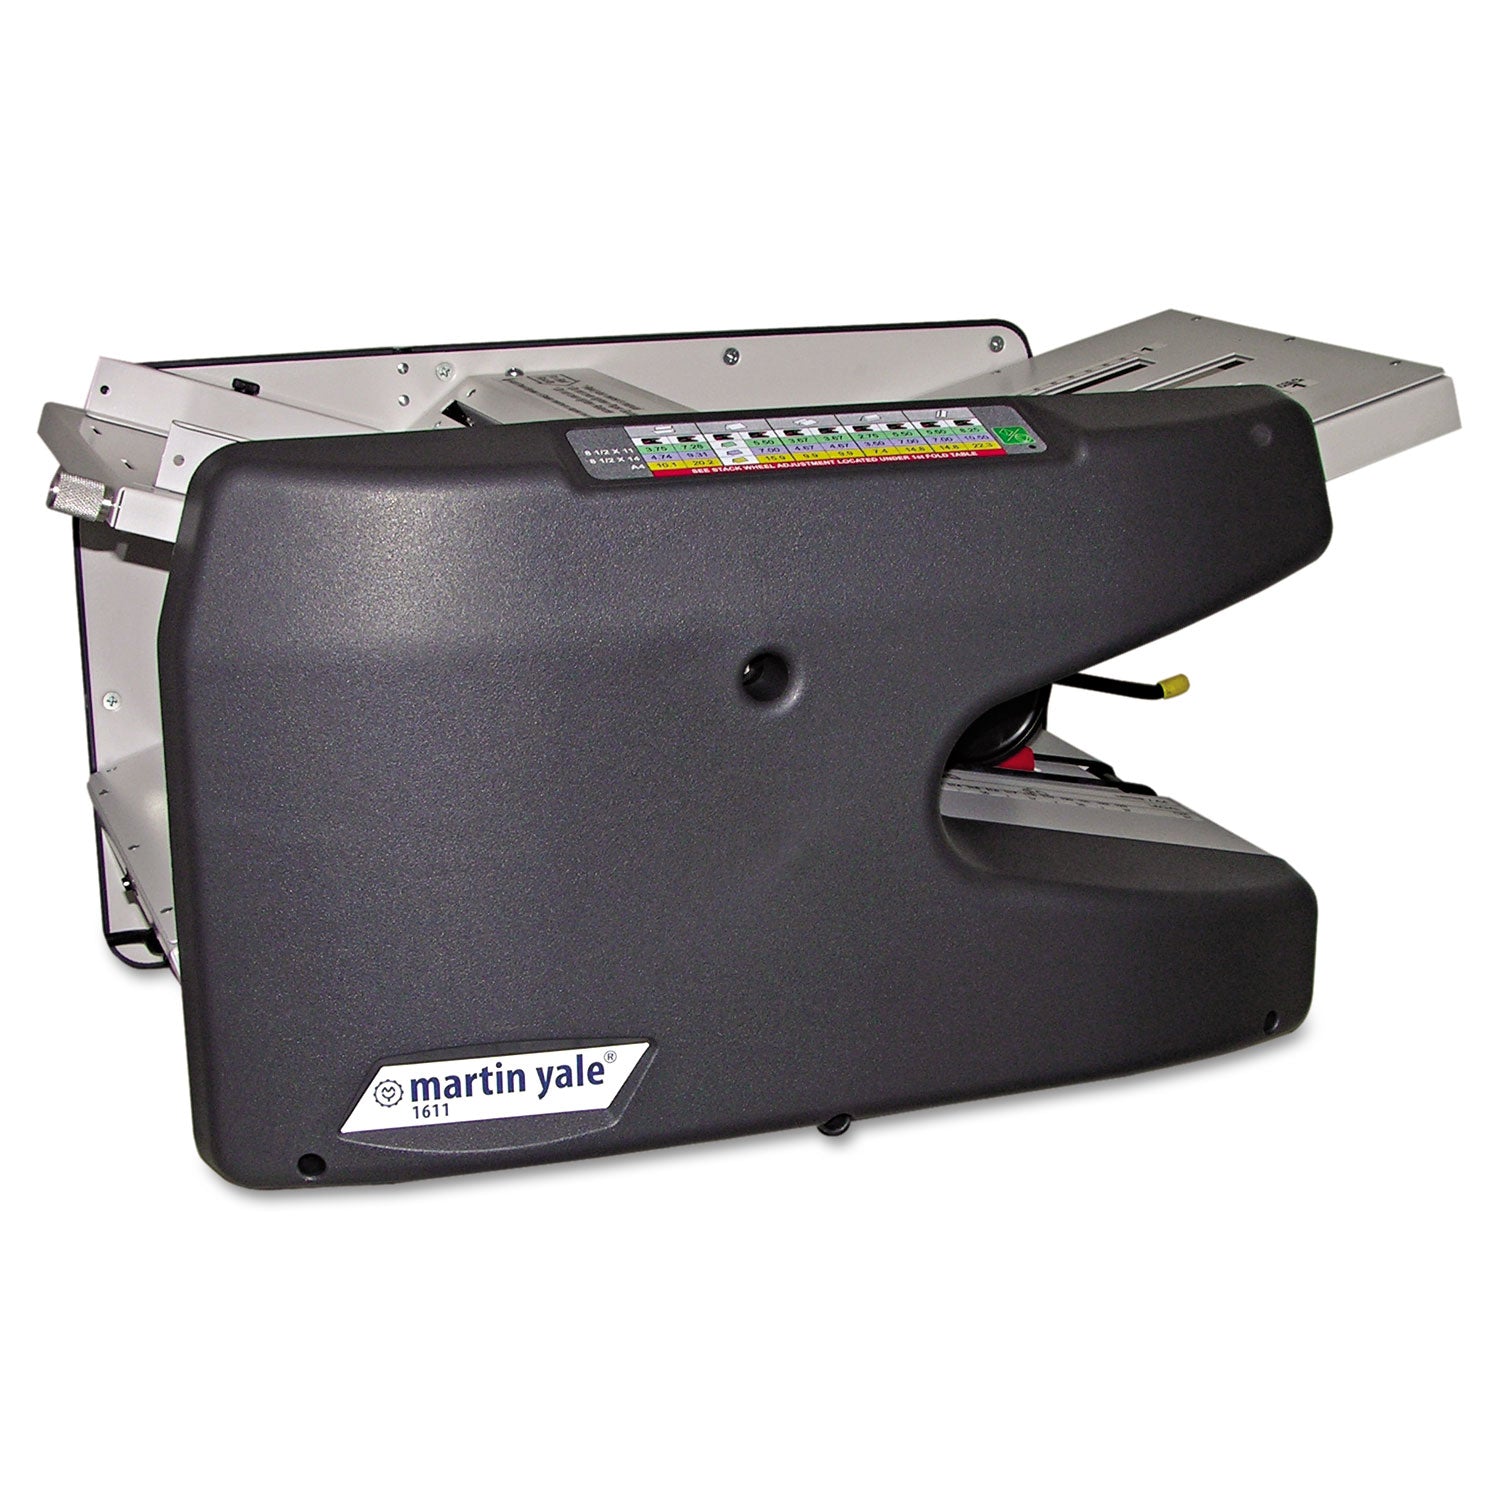 Model 1611 Ease-of-Use Tabletop AutoFolder, 9,000 Sheets/Hour - 